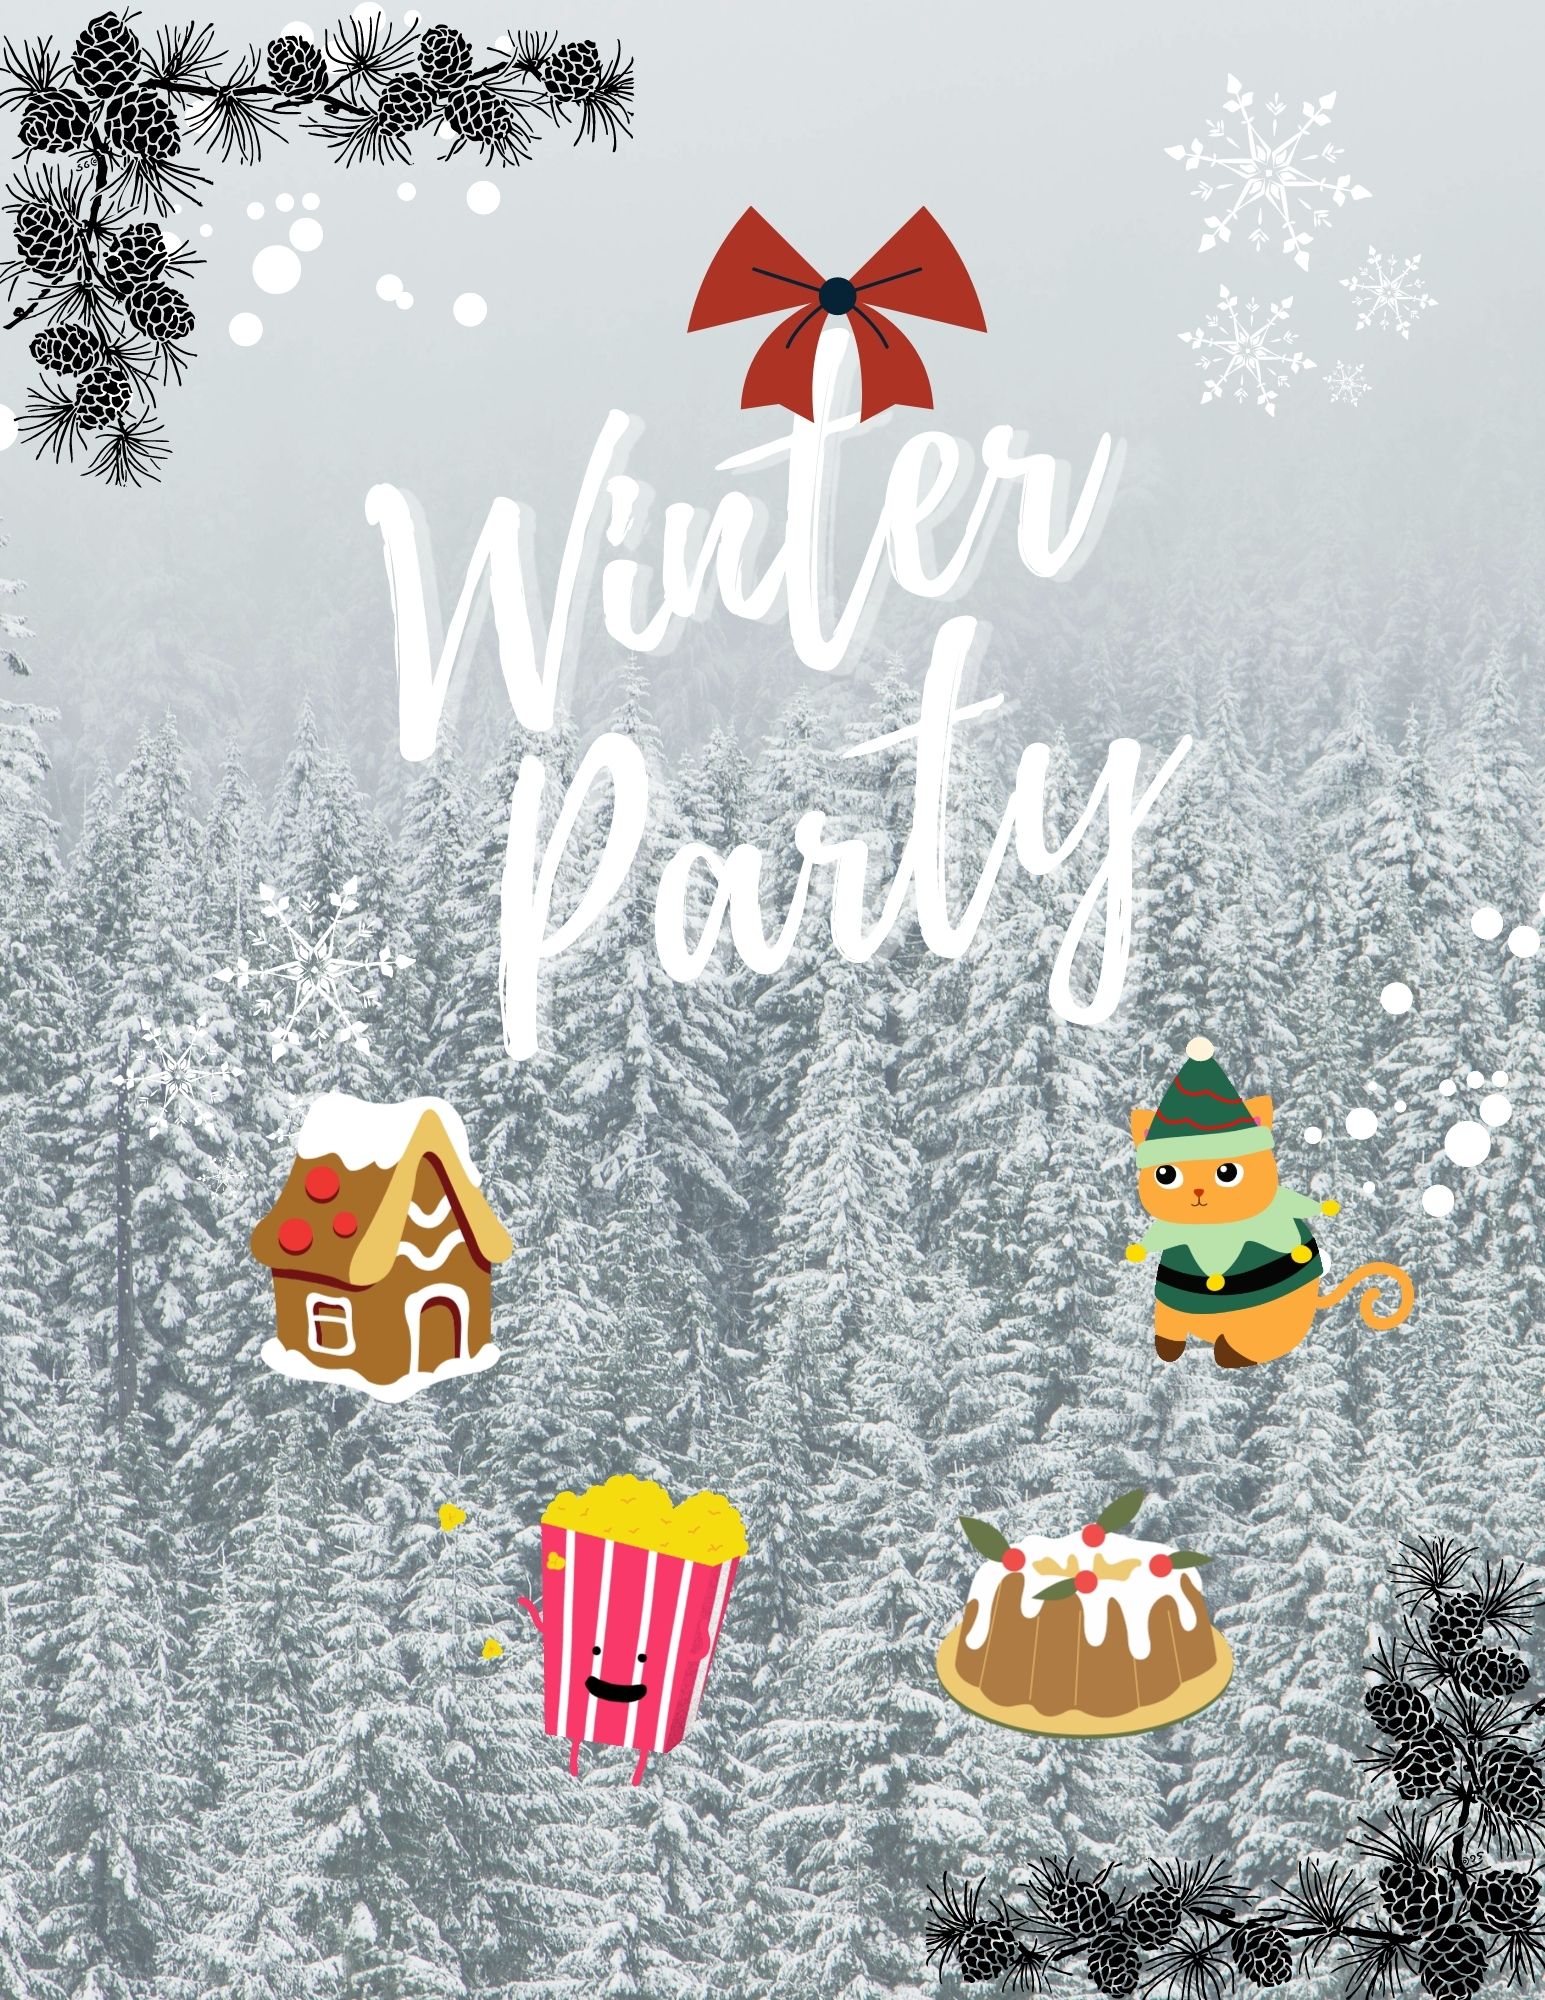 Winter Party